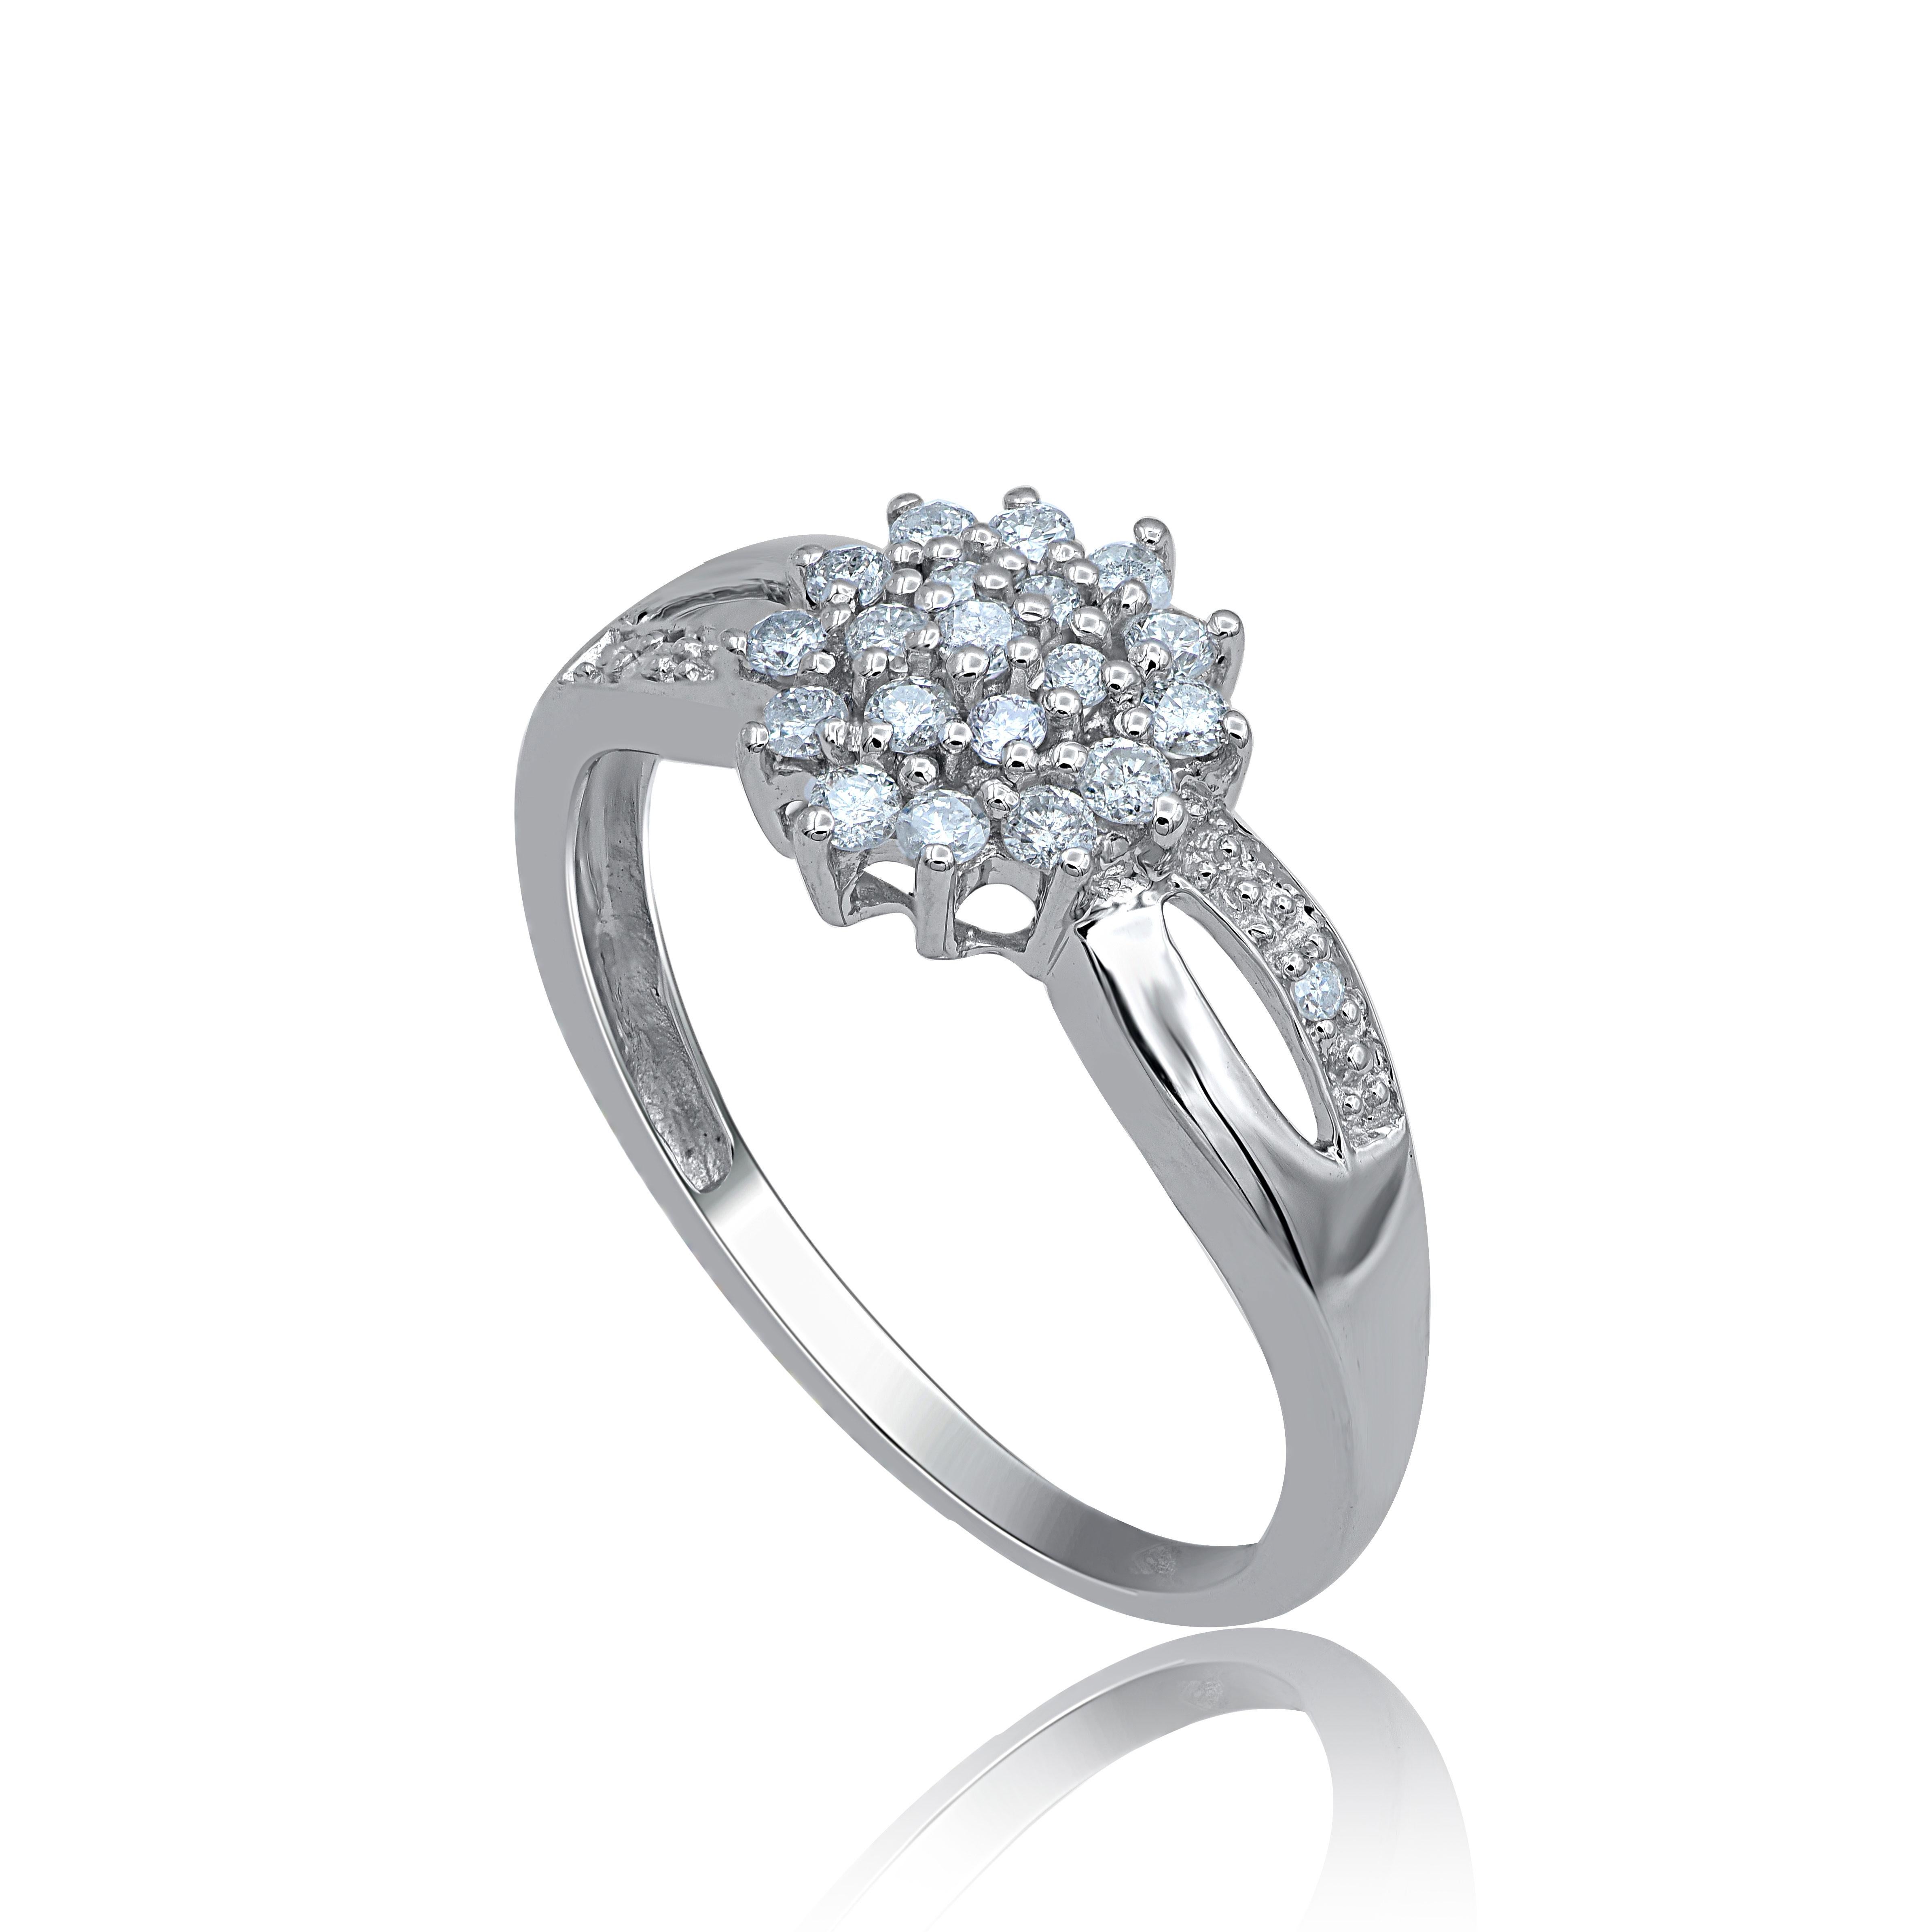 Add a touch of elegance with this diamond engagement ring. This ring is beautifully crafted in 14 karat white gold and set with 21 single cut and brilliant cut round diamonds in pave & prong setting. The total weight of diamonds is 0.25 carat, H-I